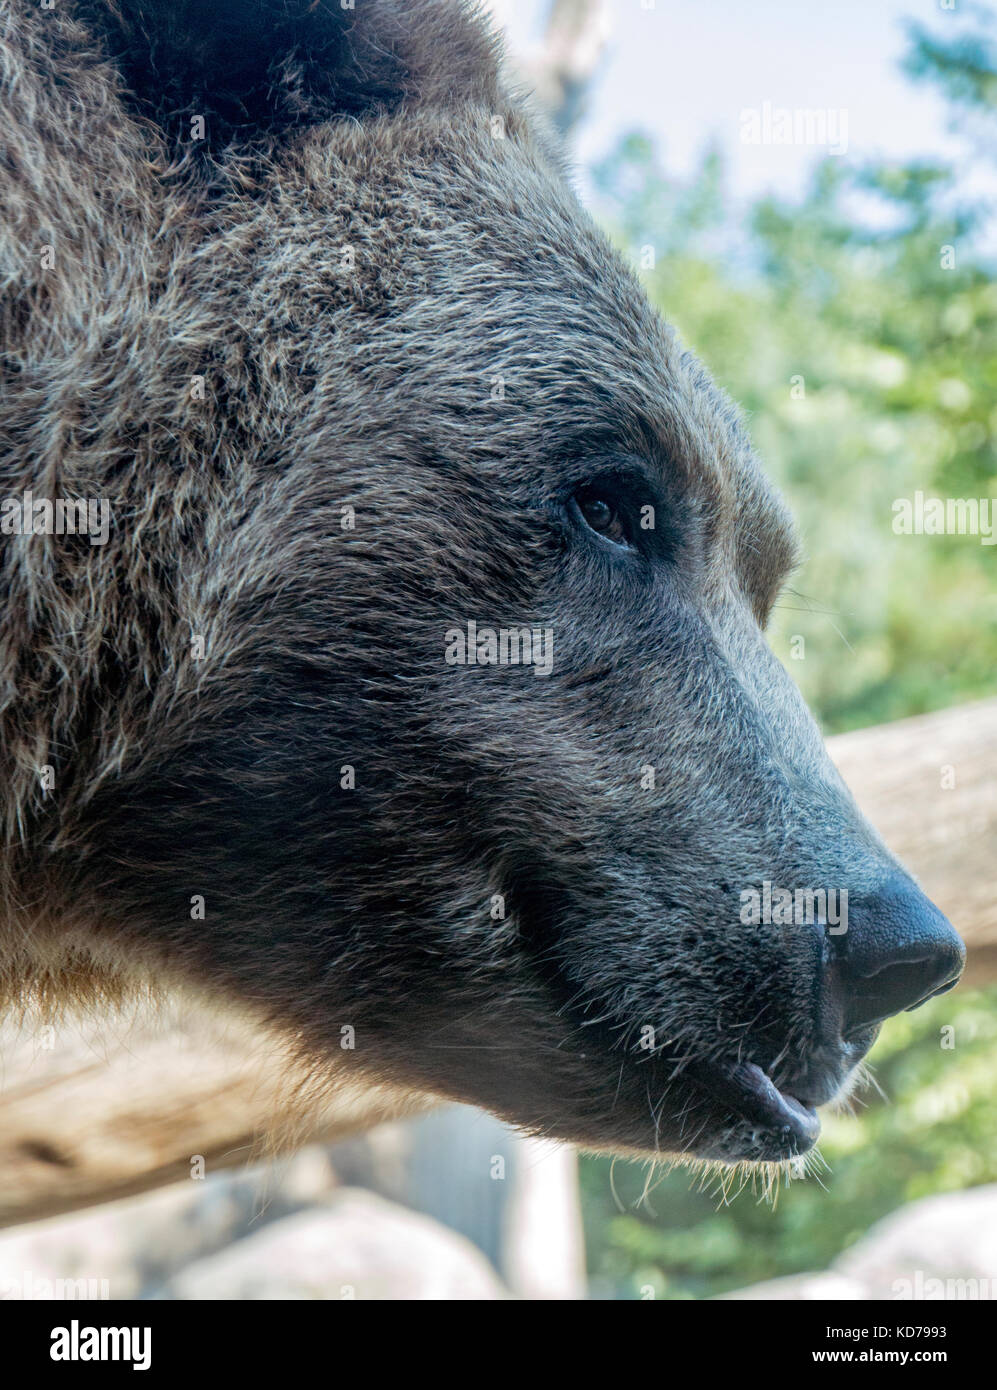 An up close shot of a grizzly bear giving a mischievious look. Stock Photo